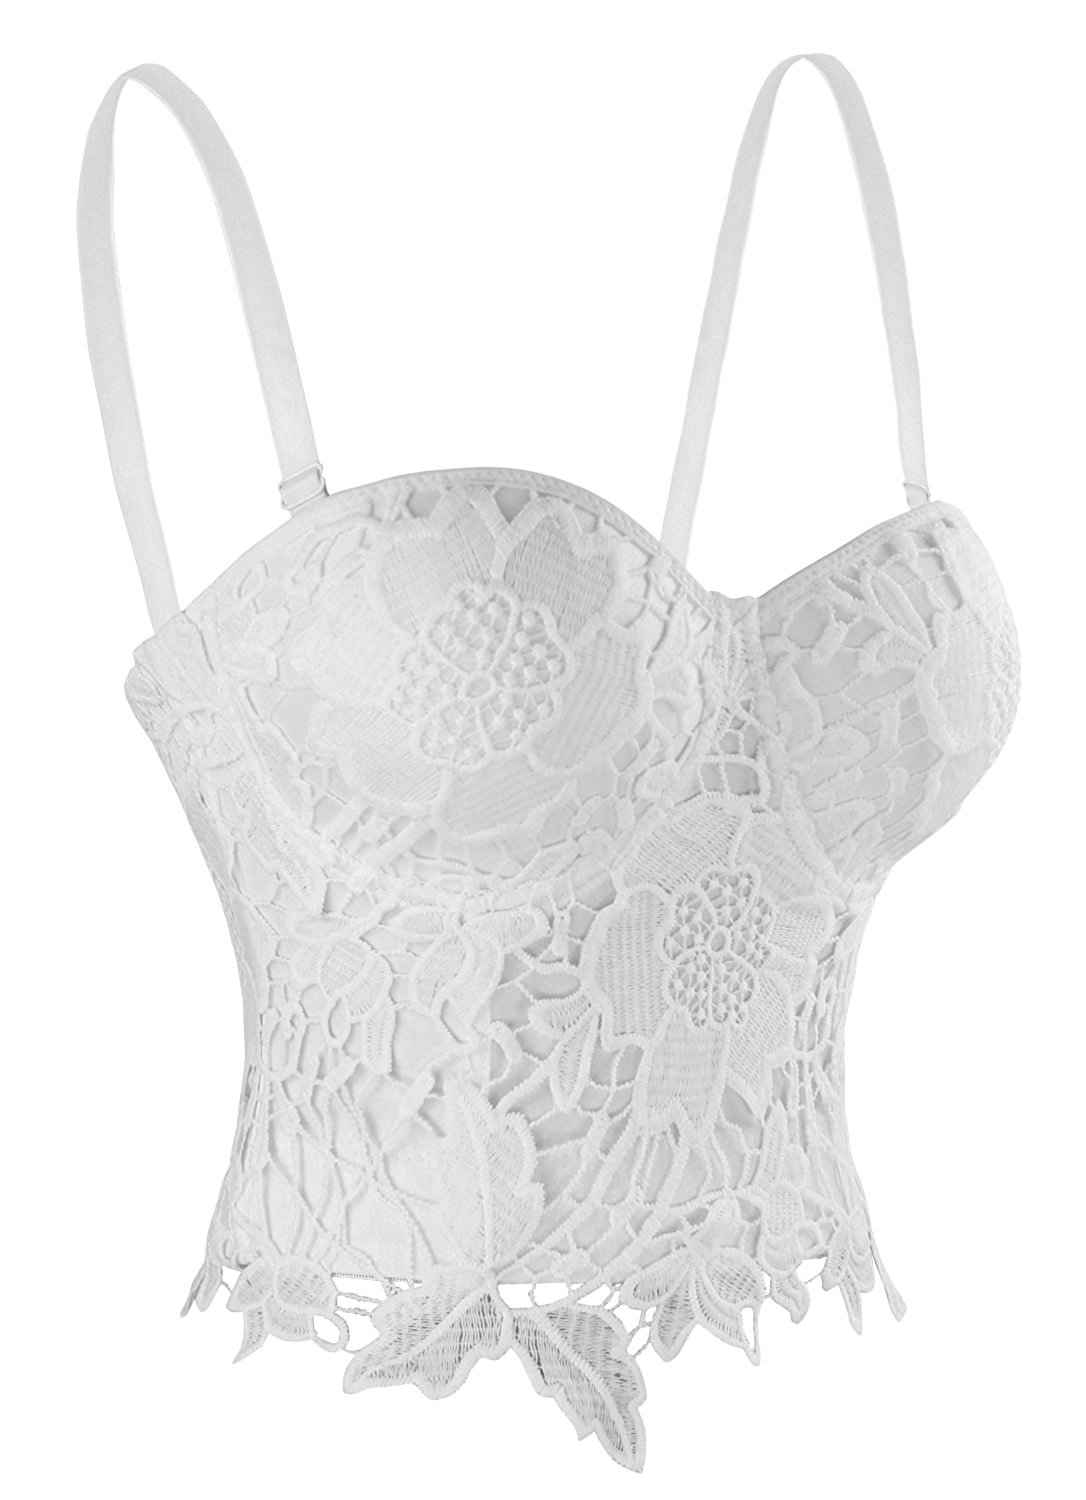 Goth Floral Lace Bustier White - Wholesale Lingerie,Sexy Lingerie,China ...